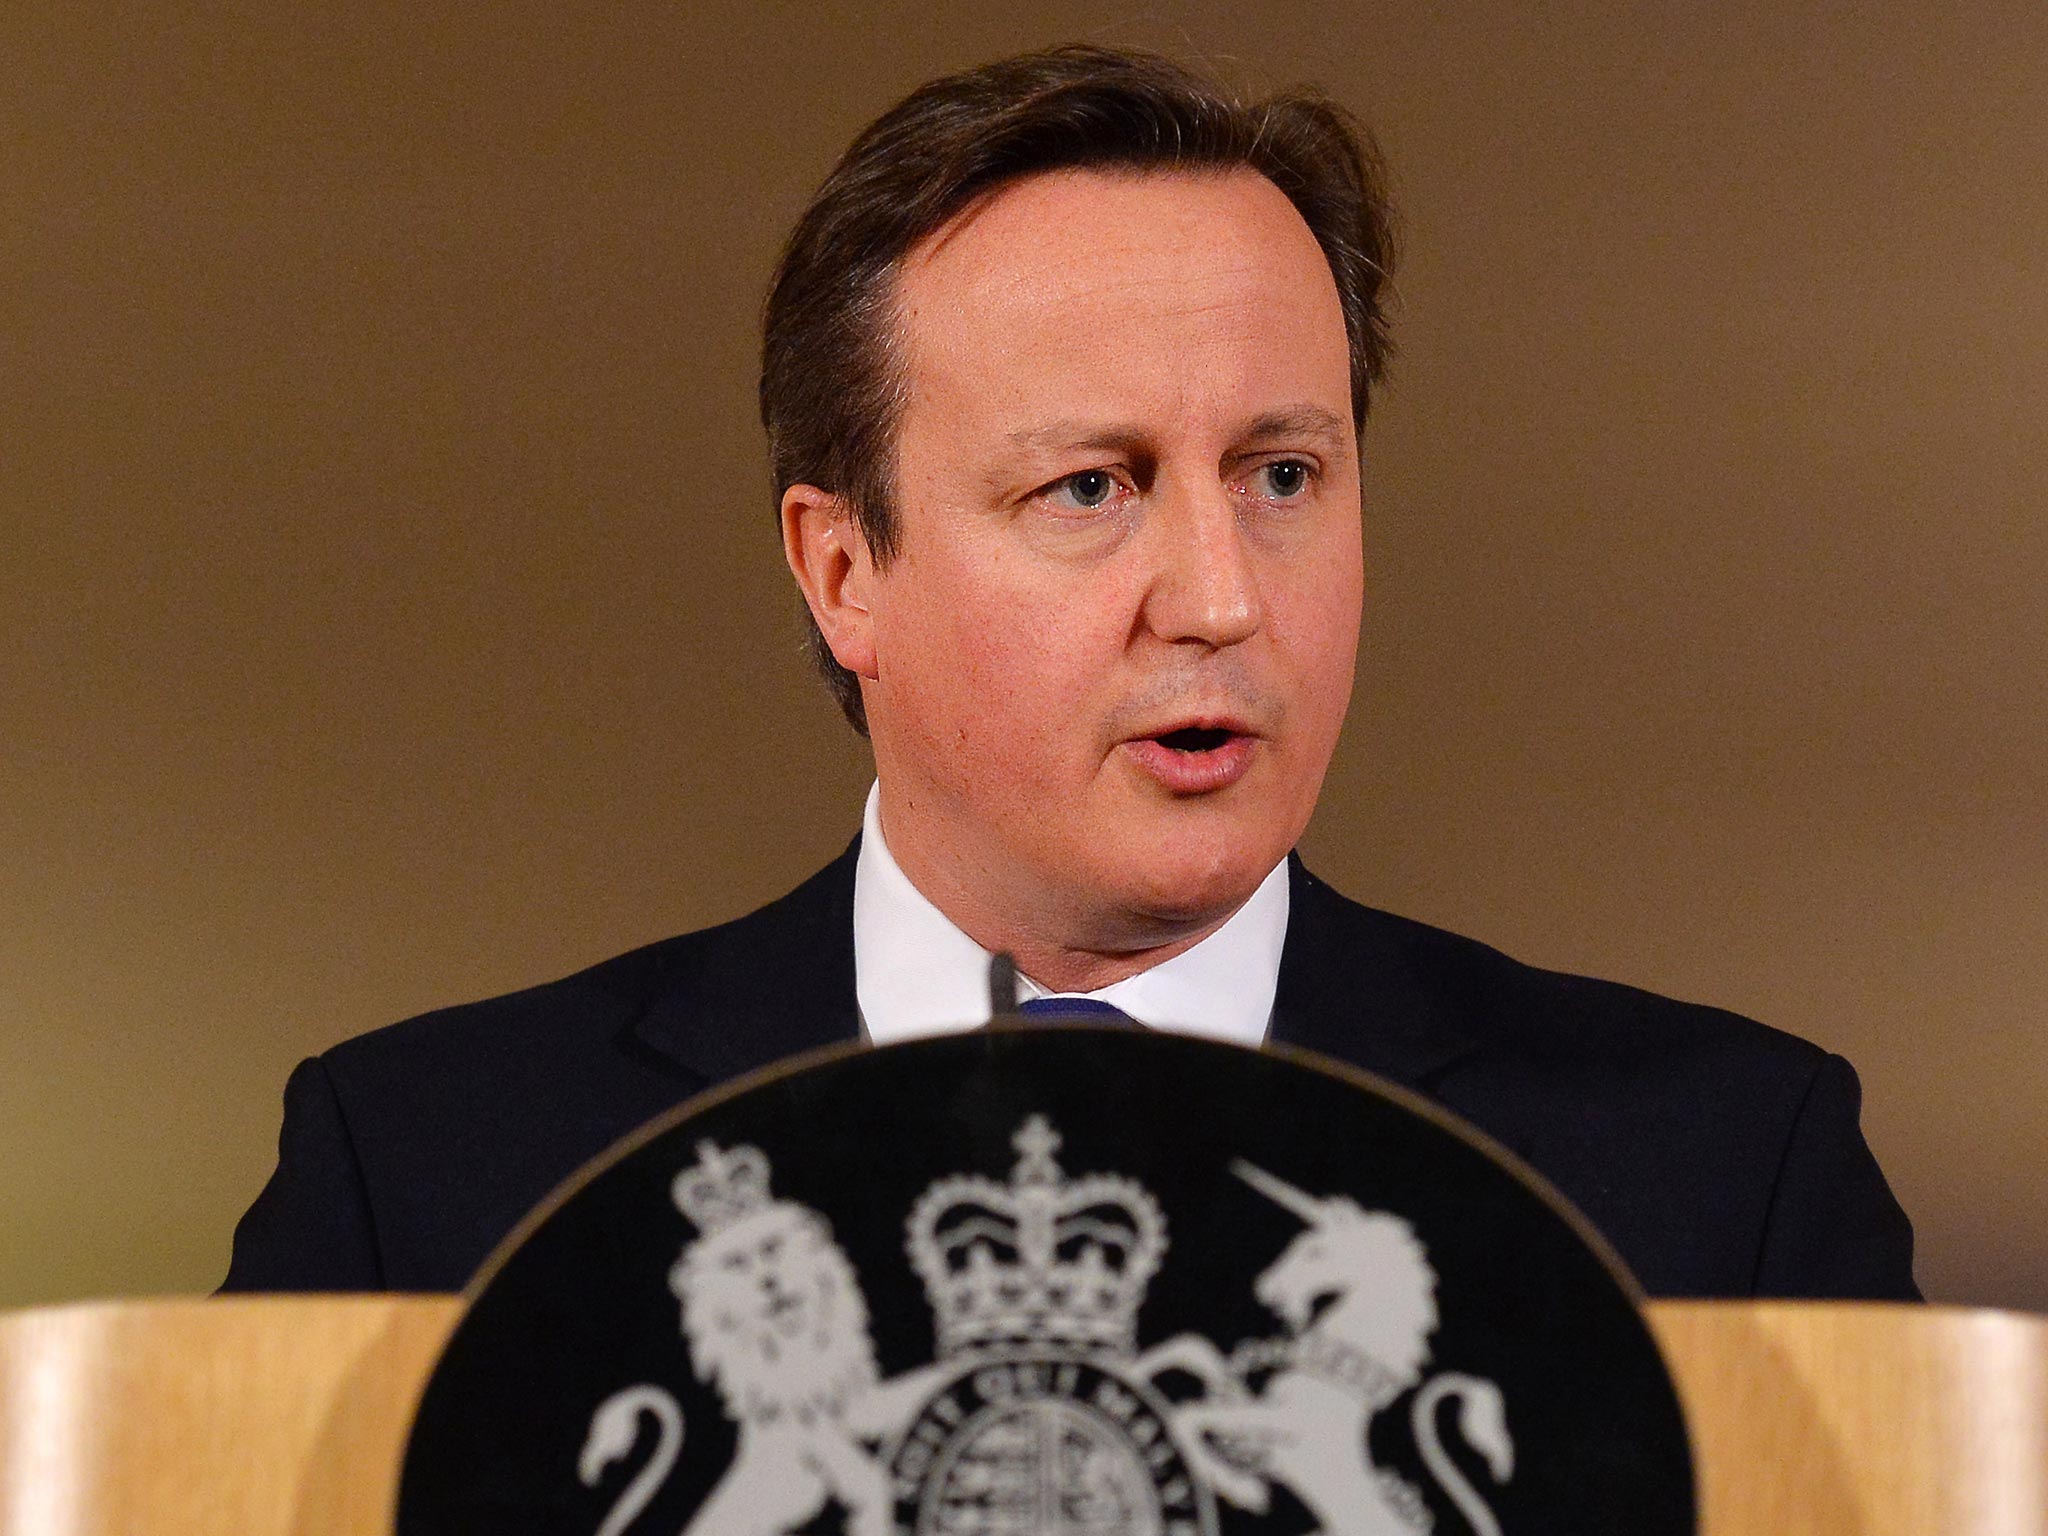 David Cameron does not want to enter into another coalition if there is another hung parliament